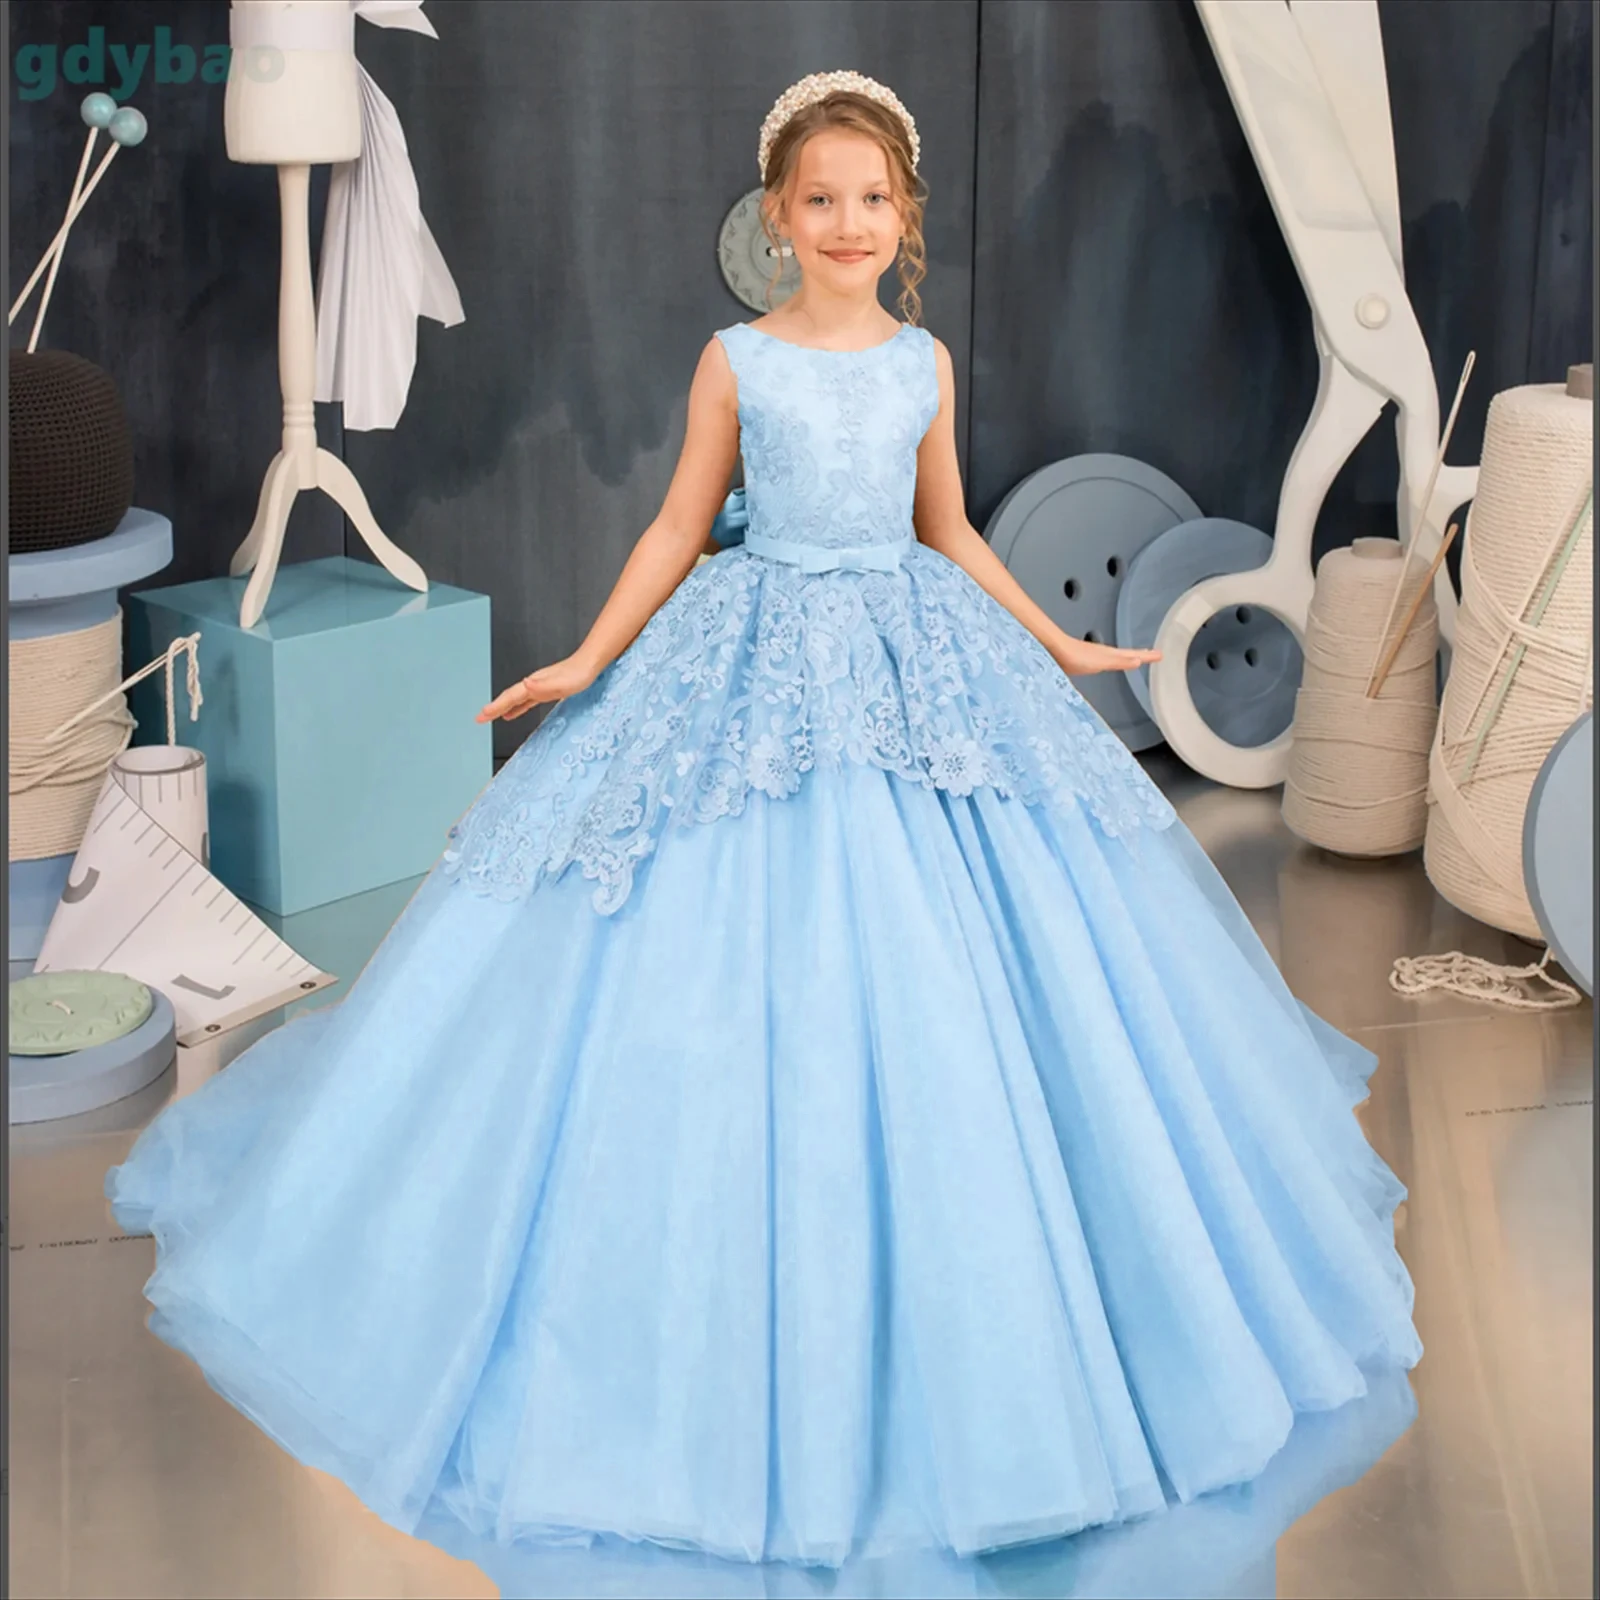 Lace-Flower-Girl-Dresses-For-Wedding-Little-Kids-Tiered-Tulle-Pageant ...